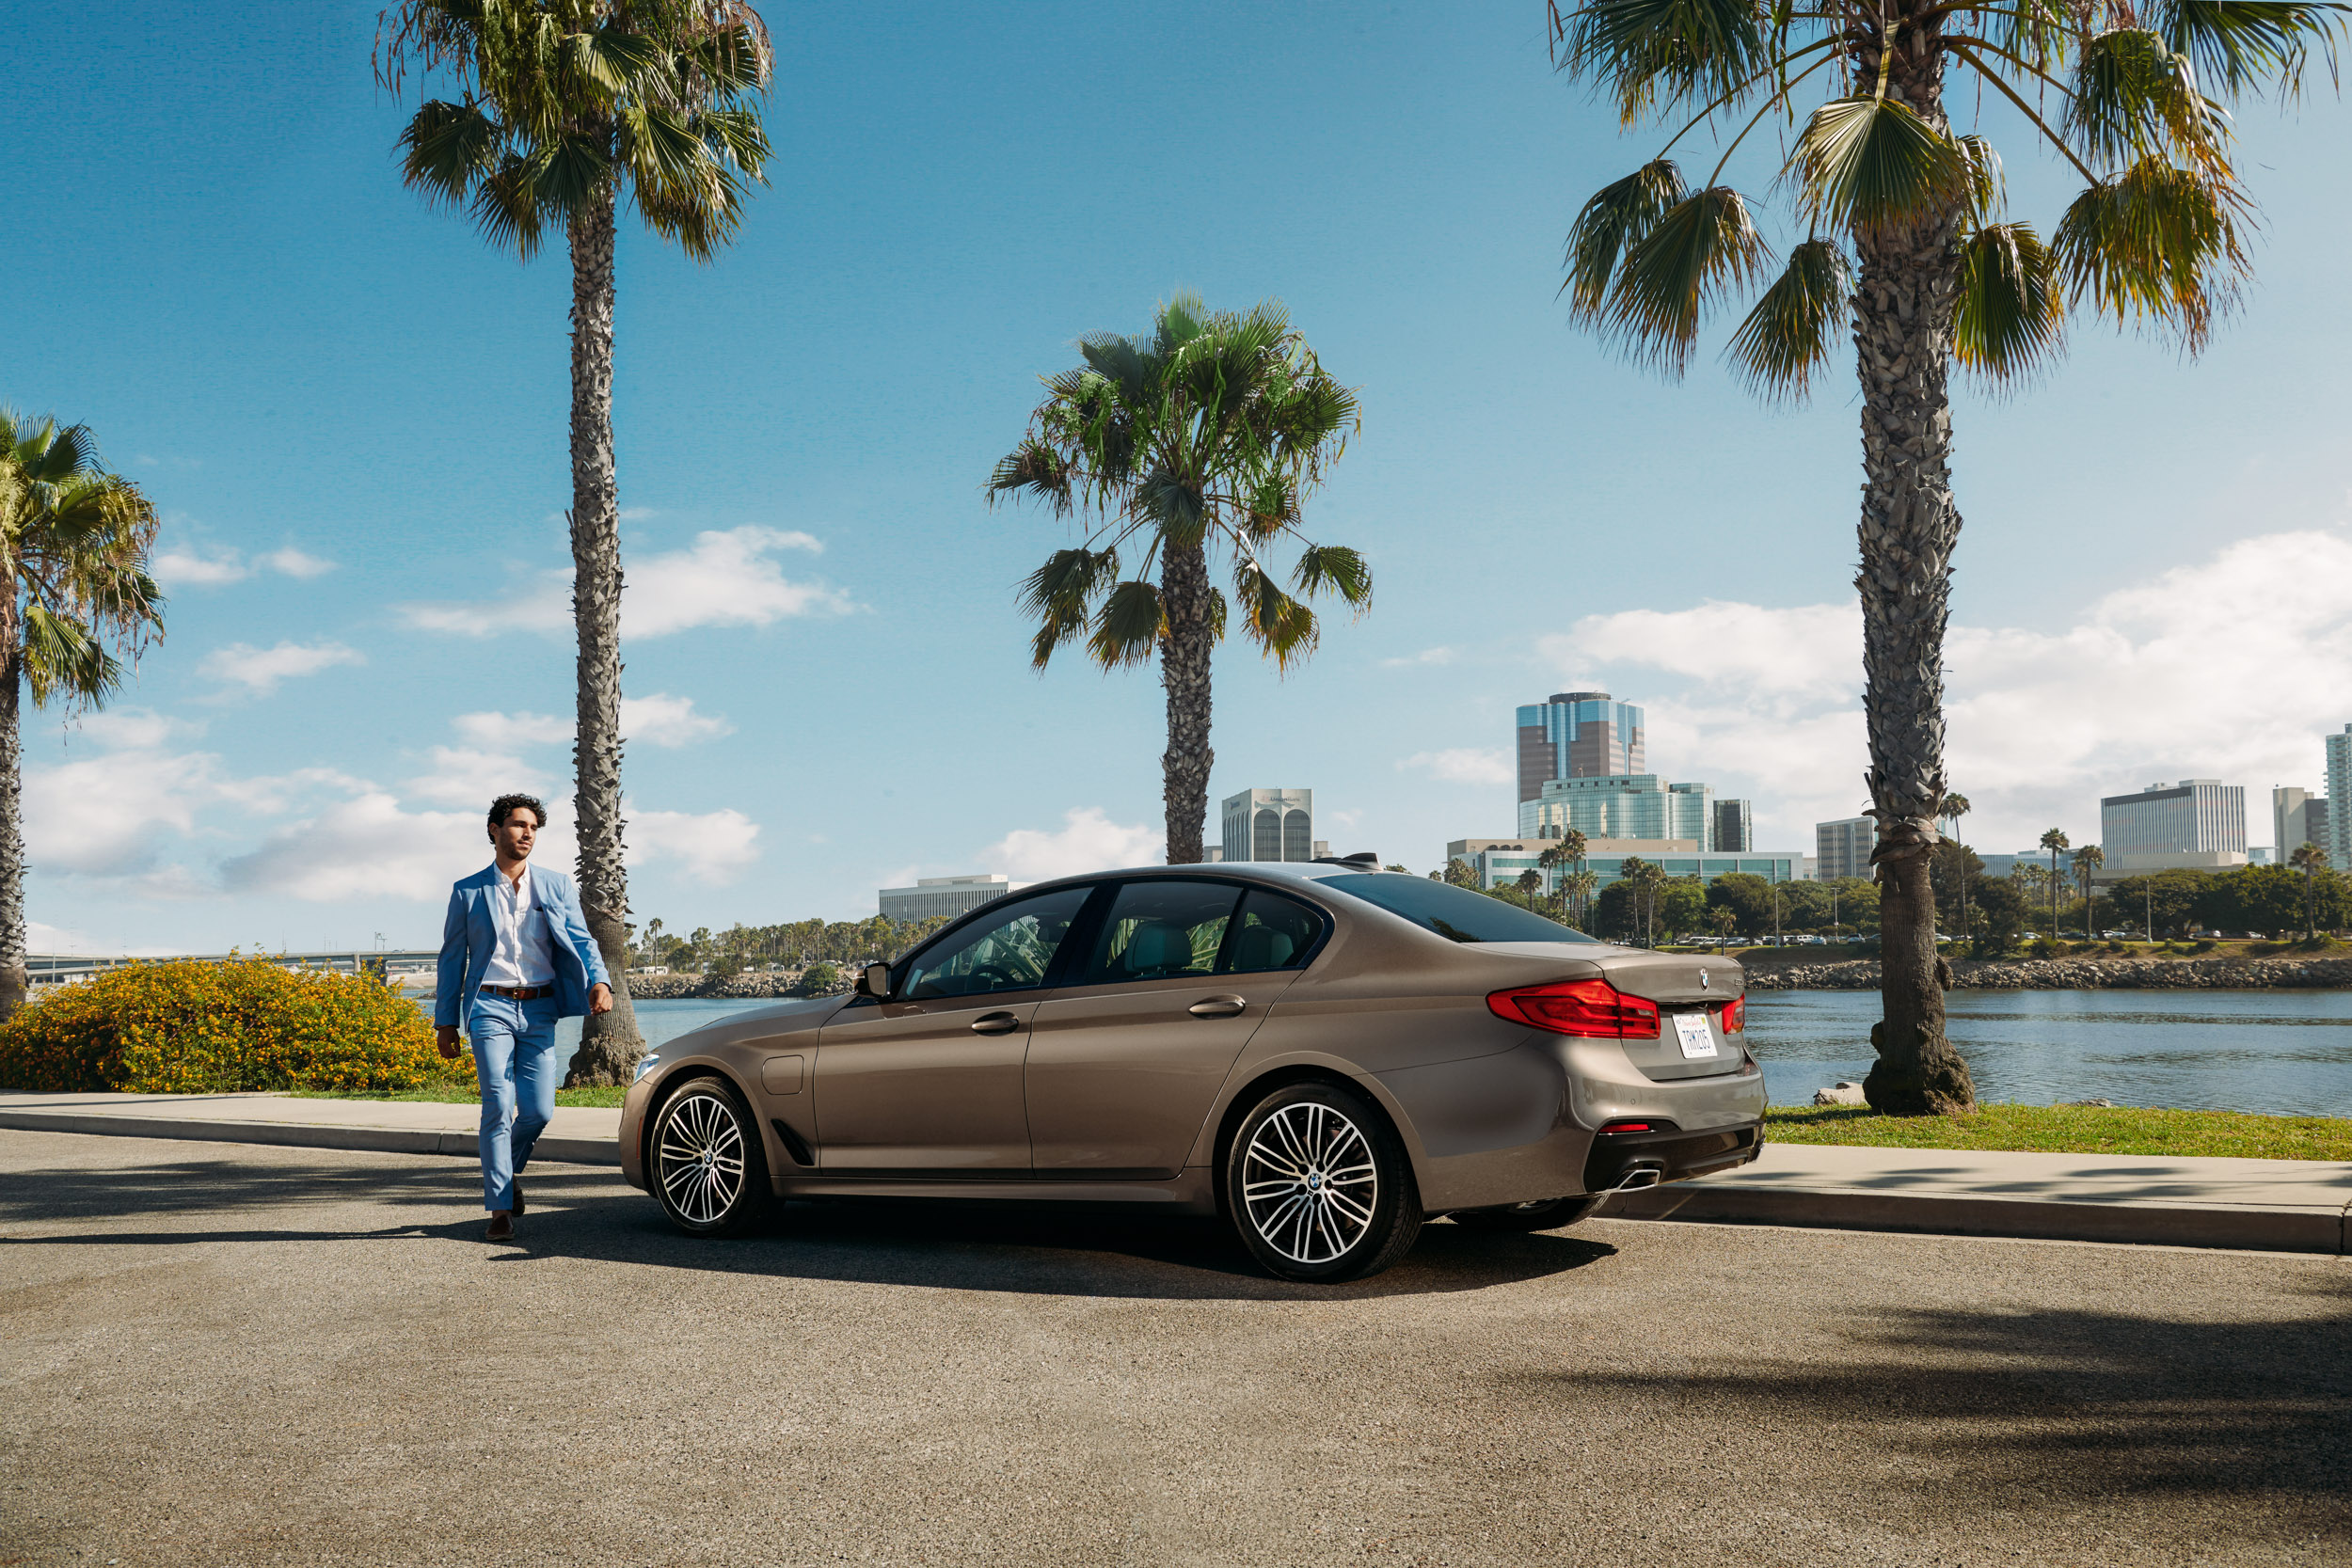 Caleb Kuhl, California Commercial Car Photographer, shoots BMW Diversity automobile lifestyle campaign at 7 locations in Los Angeles.